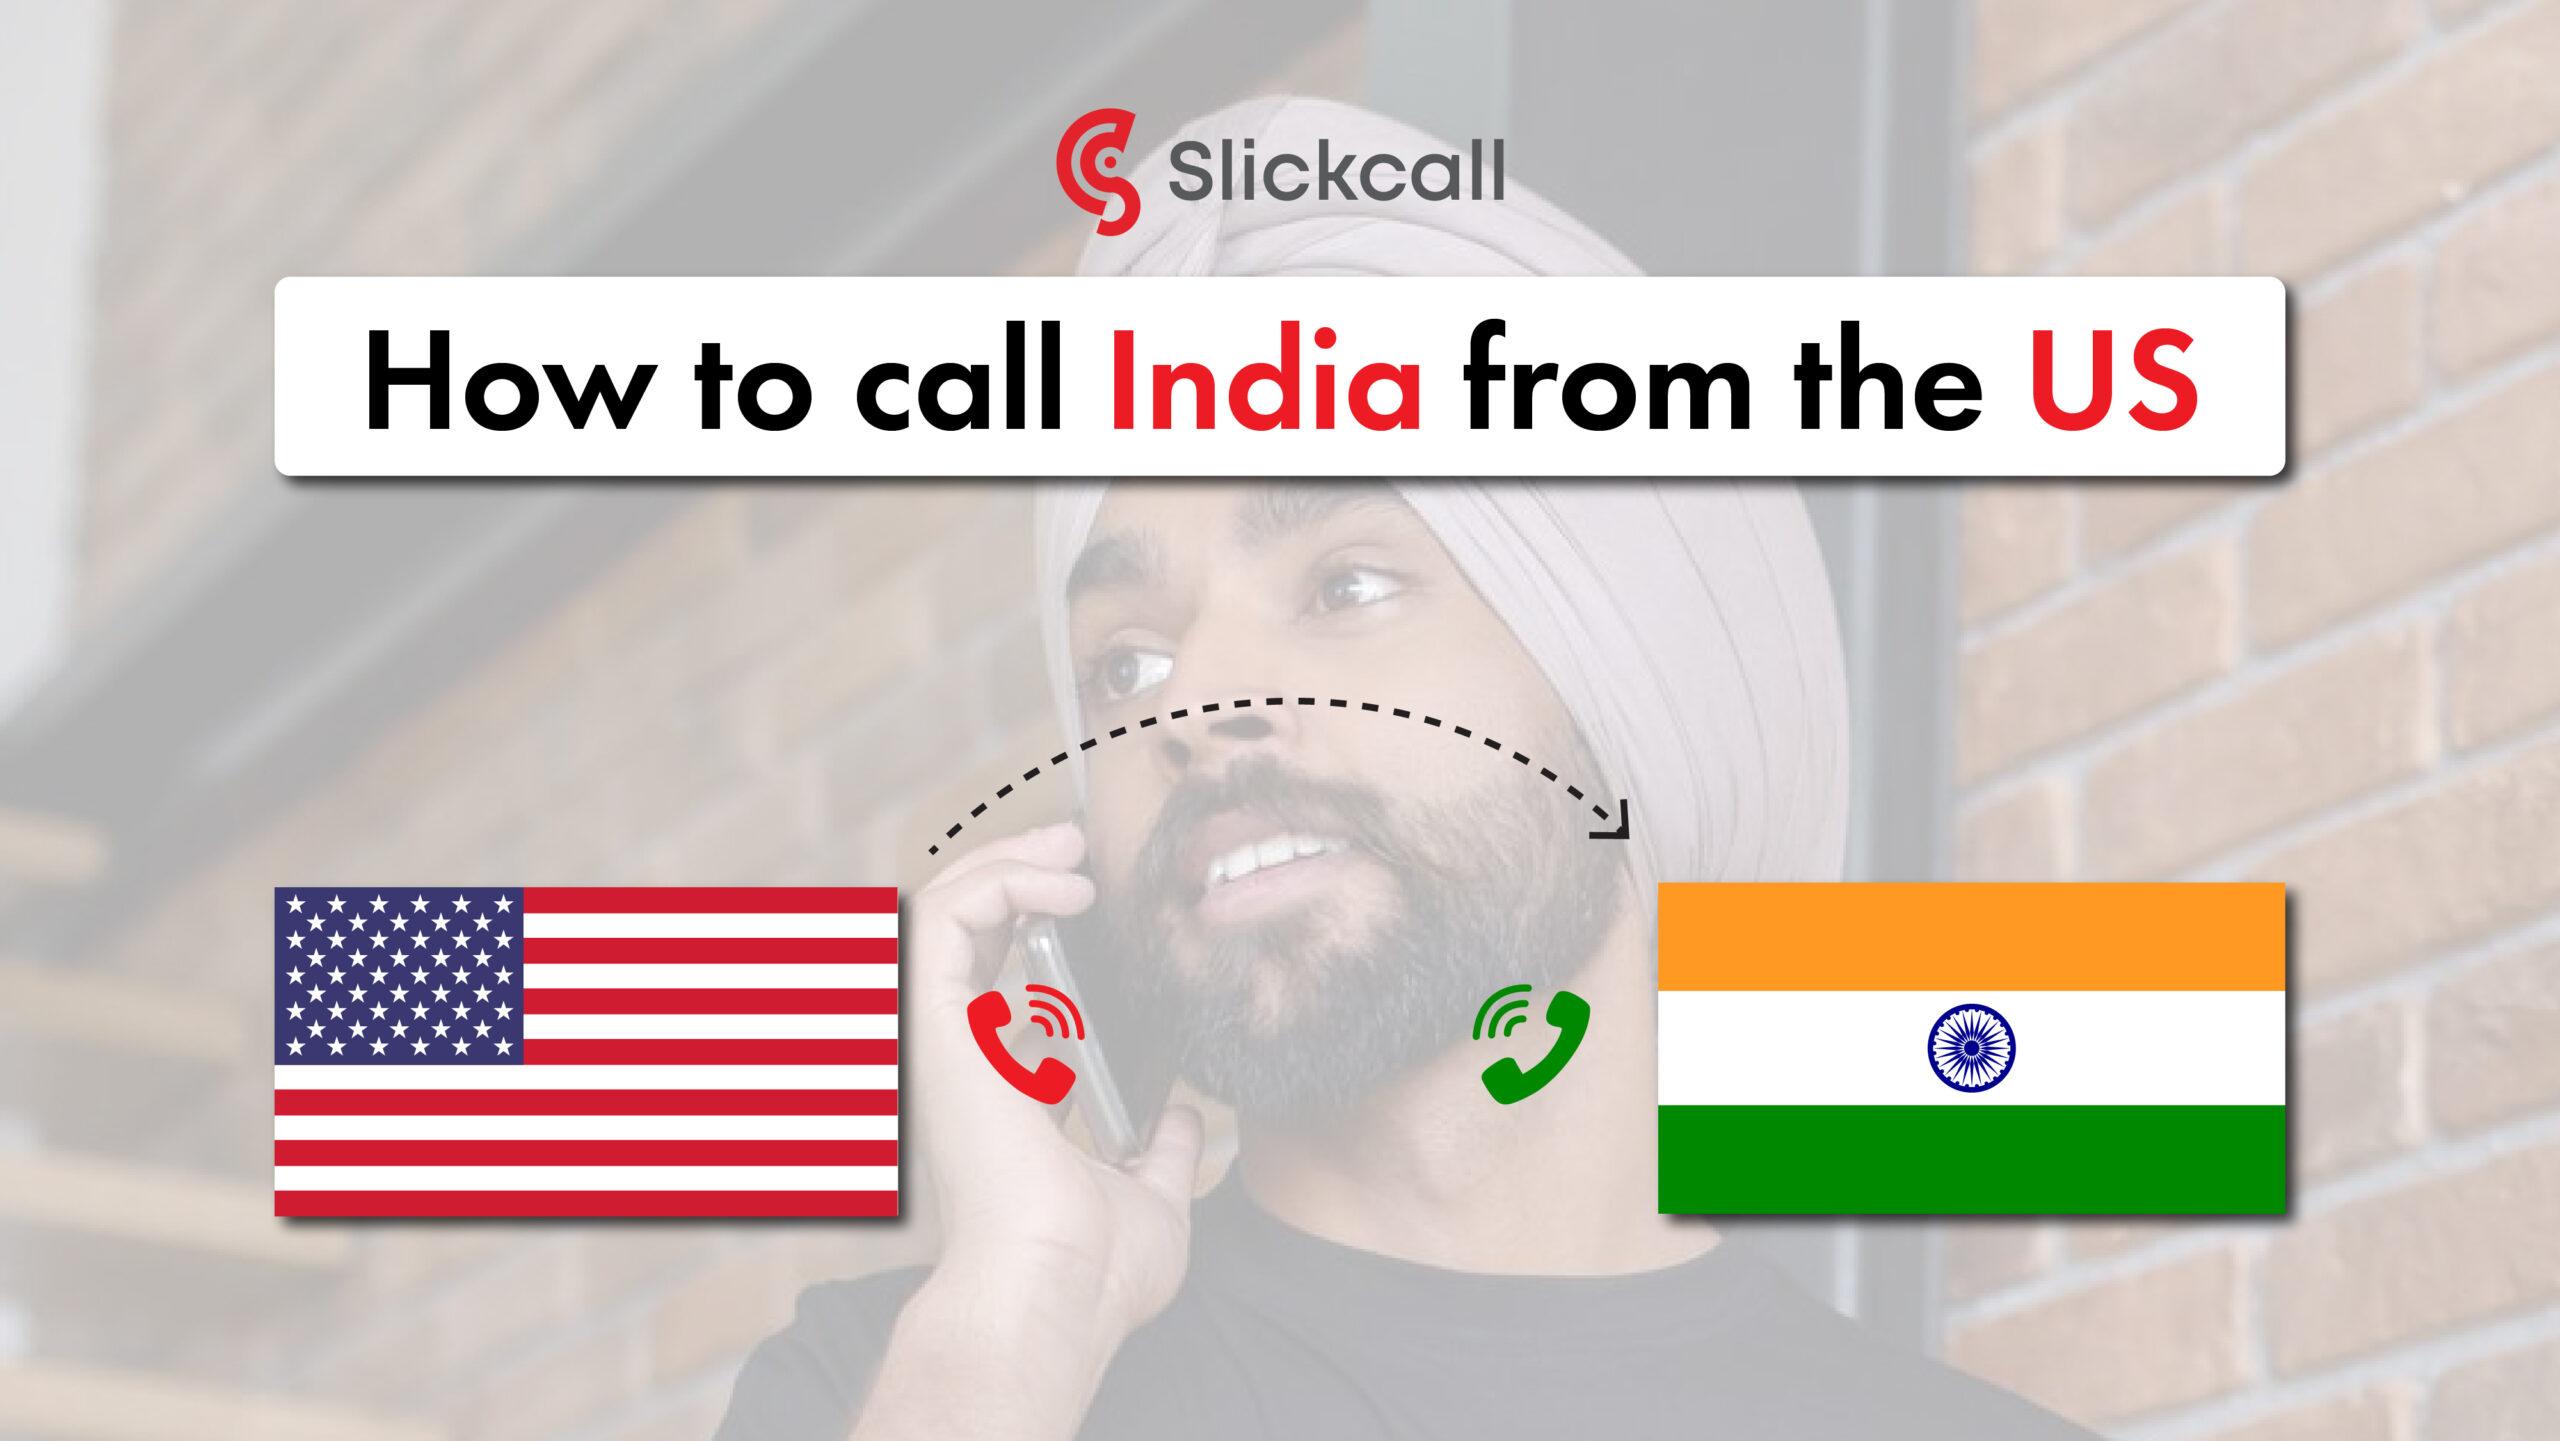 cheapest way to call India from the US